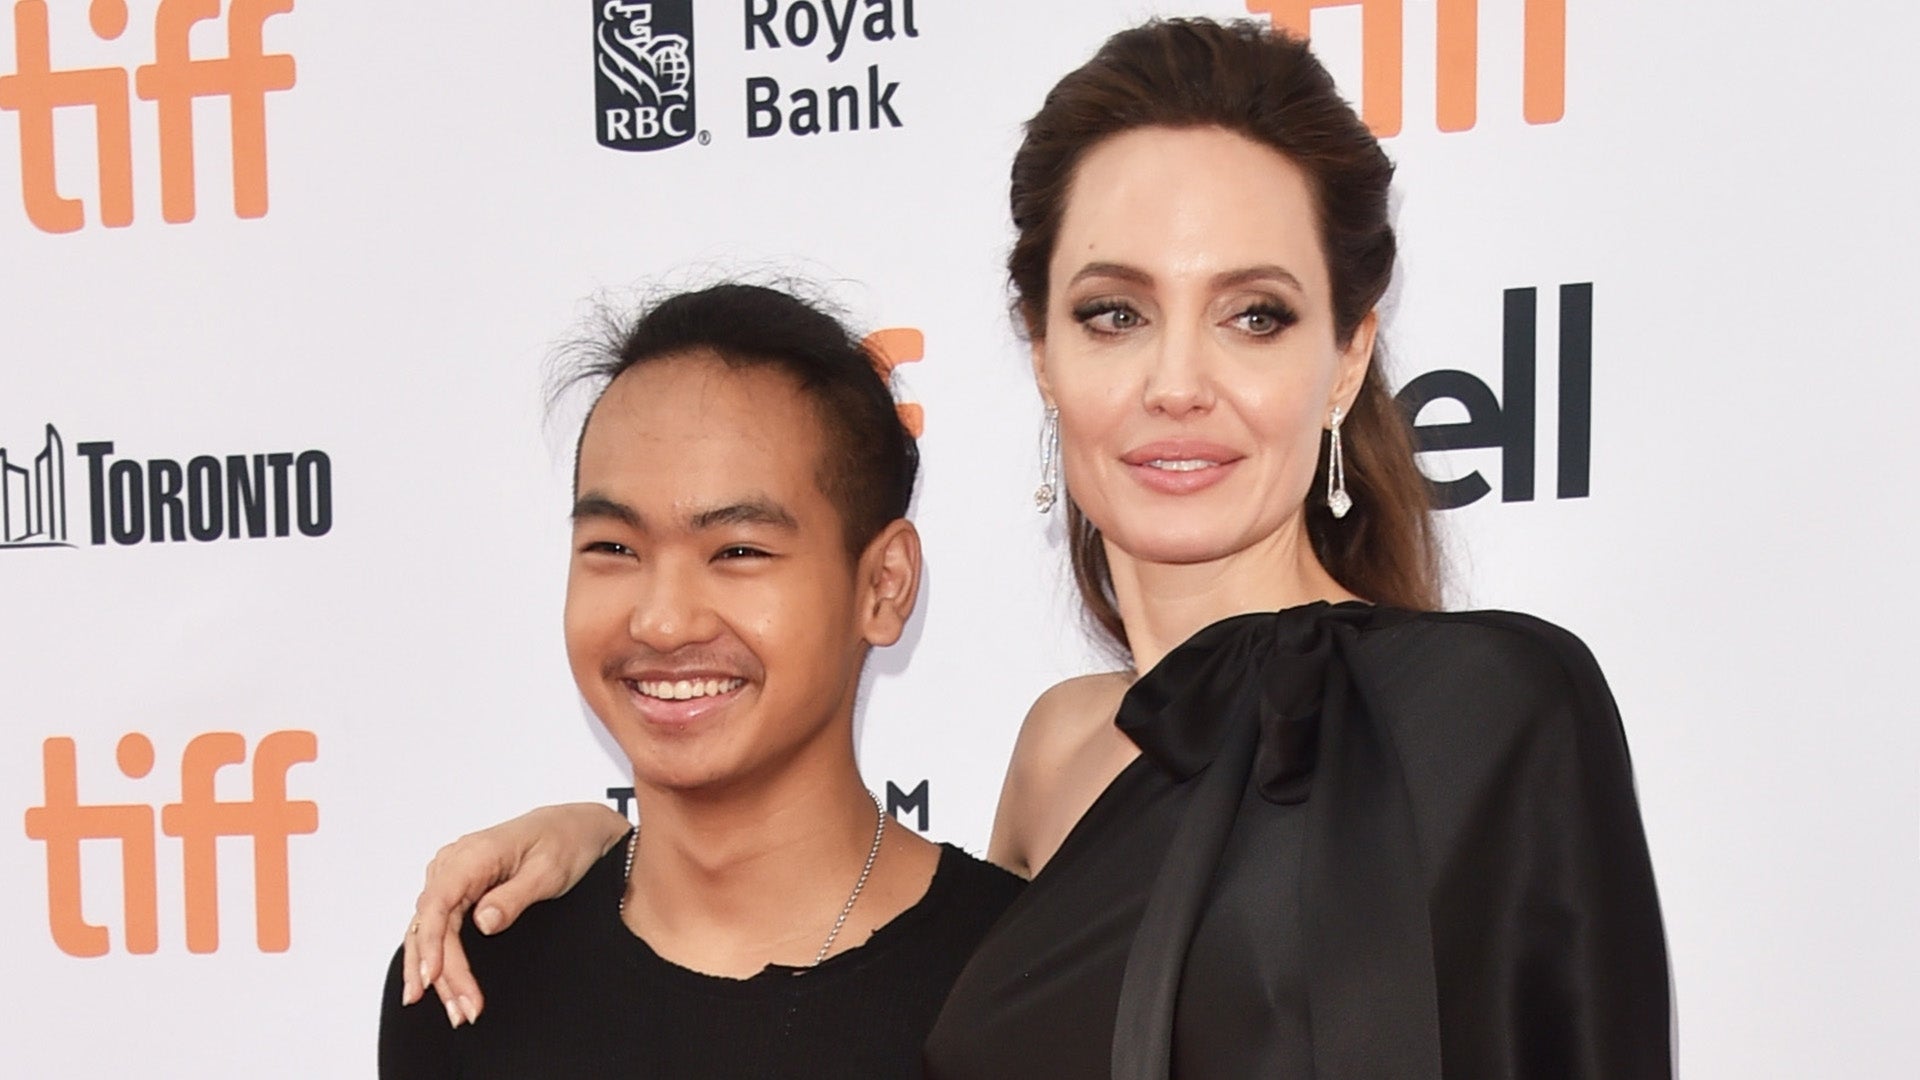 Maddox Jolie-Pitt Celebrates 21st Birthday With Mom Angelina Jolie and Siblings (Source)